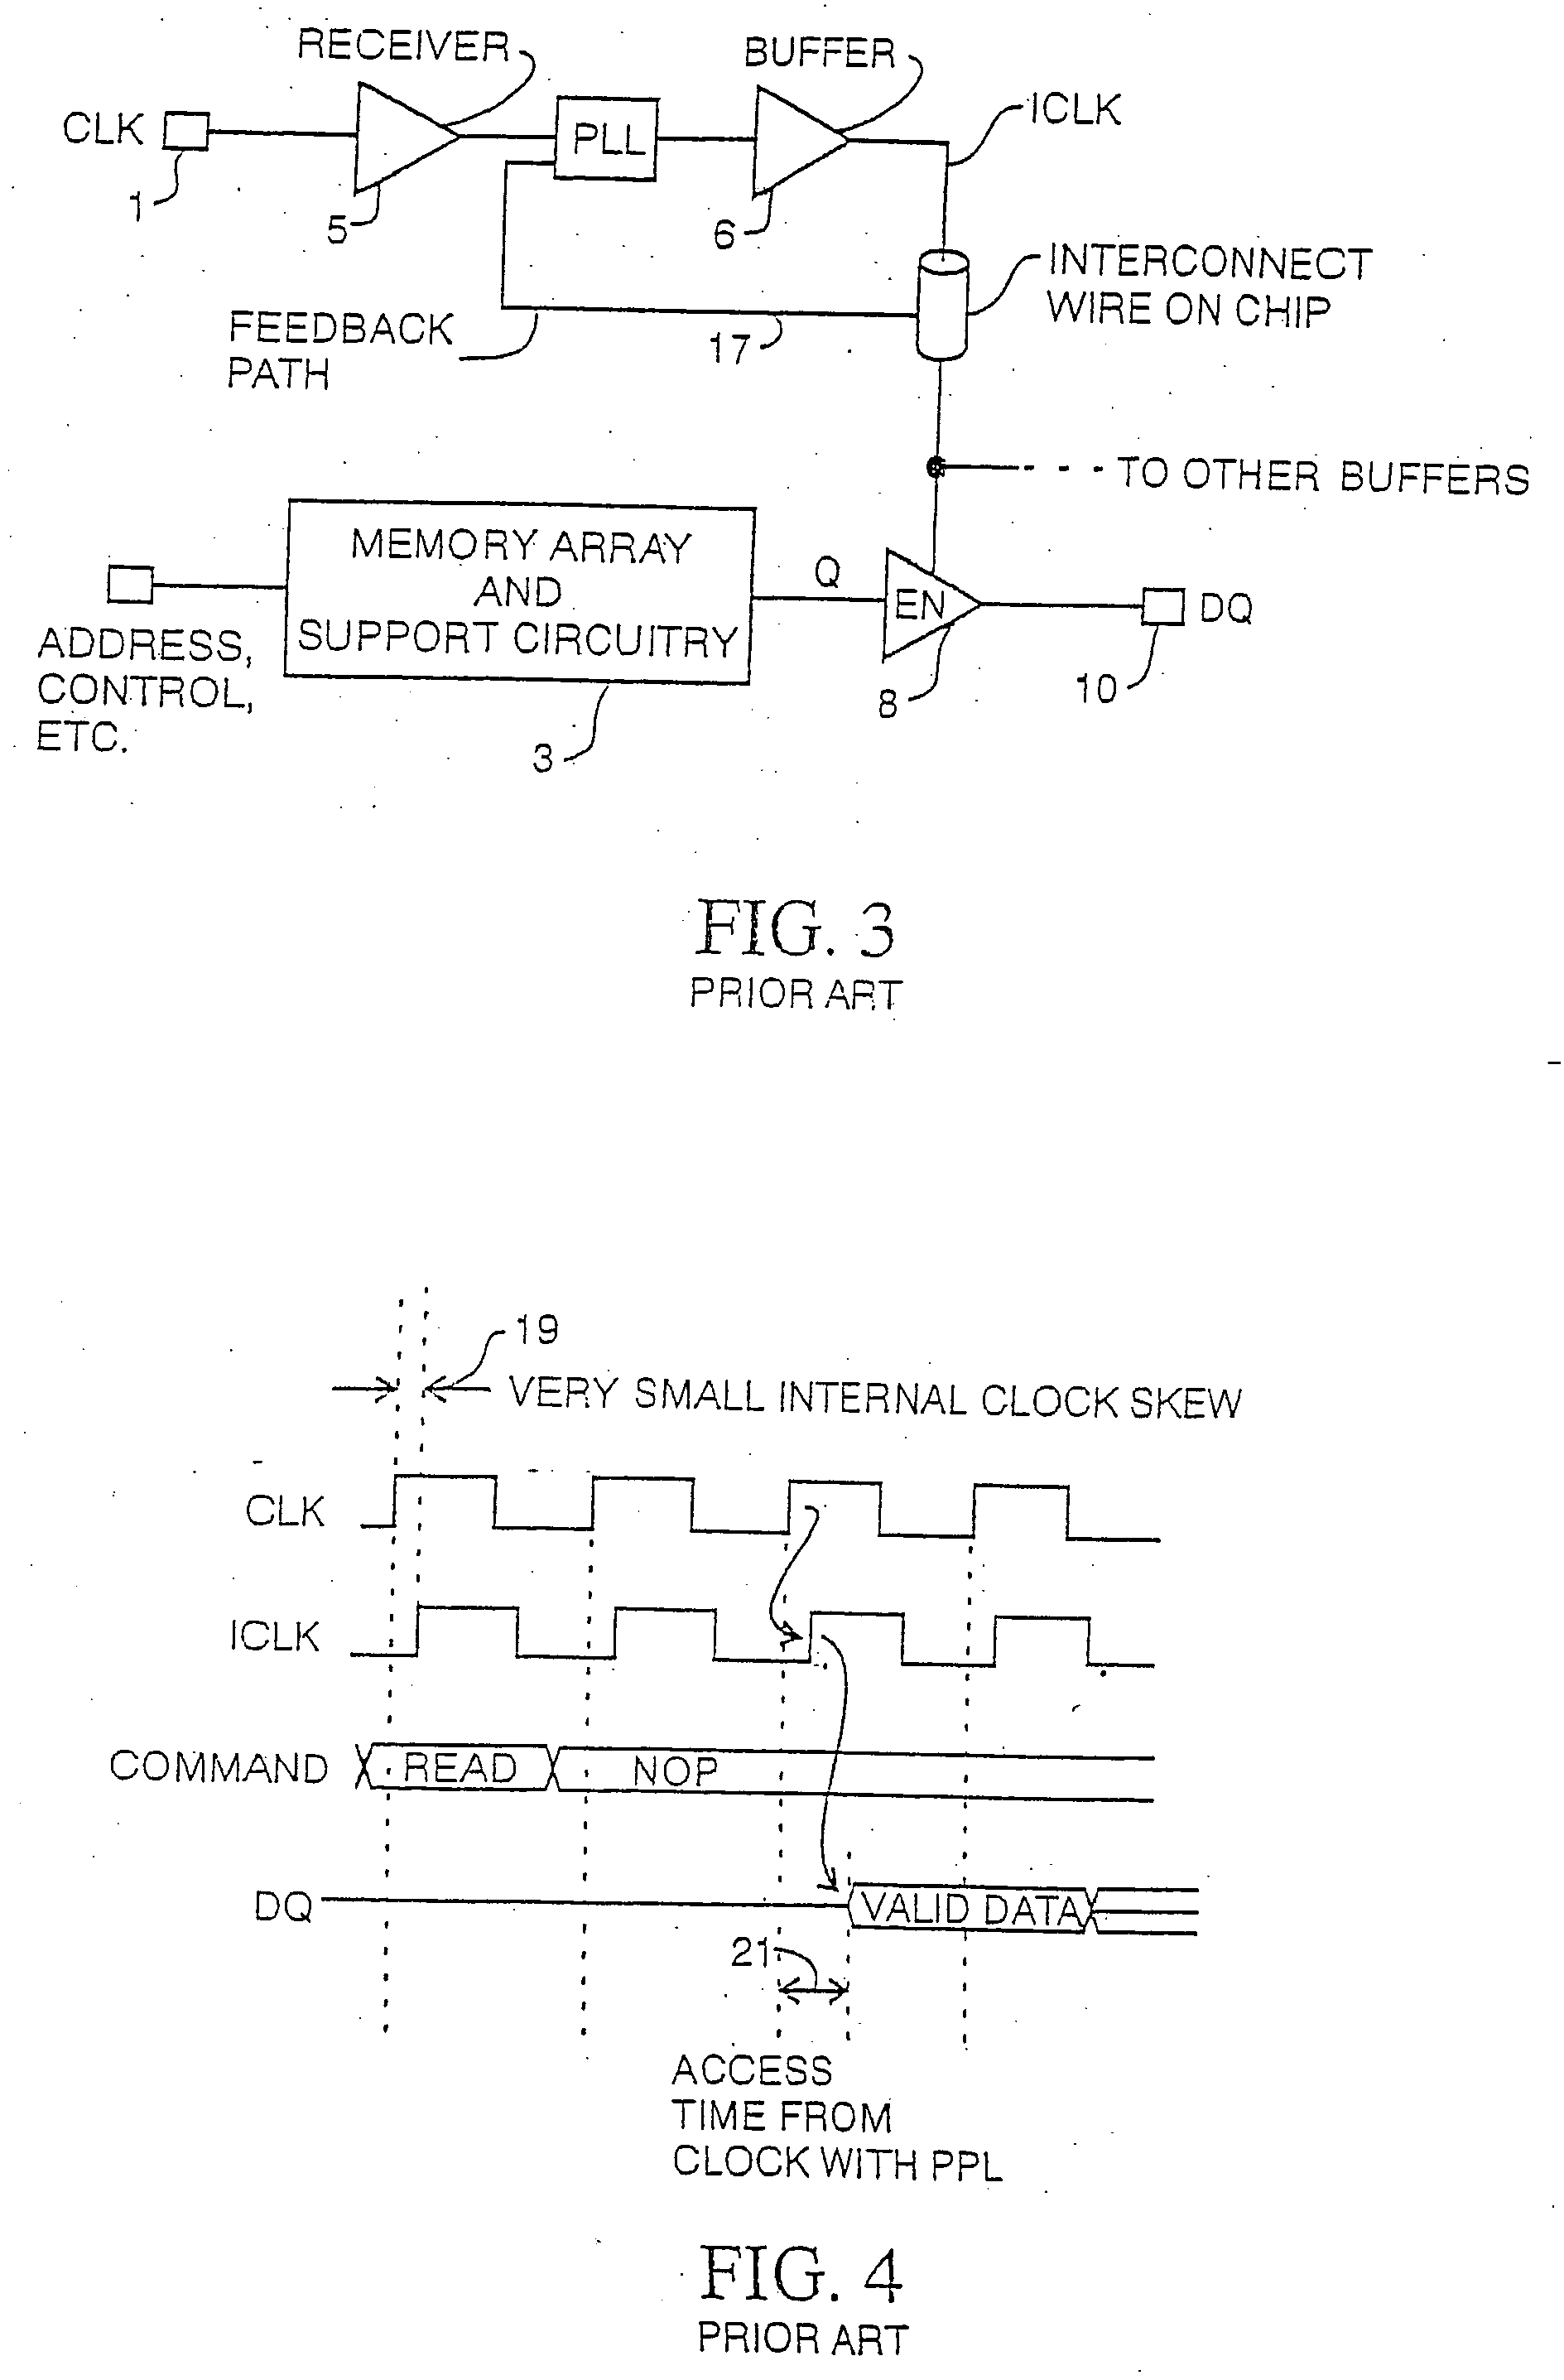 Delay locked loop implementation in a synchronous dynamic random access memory